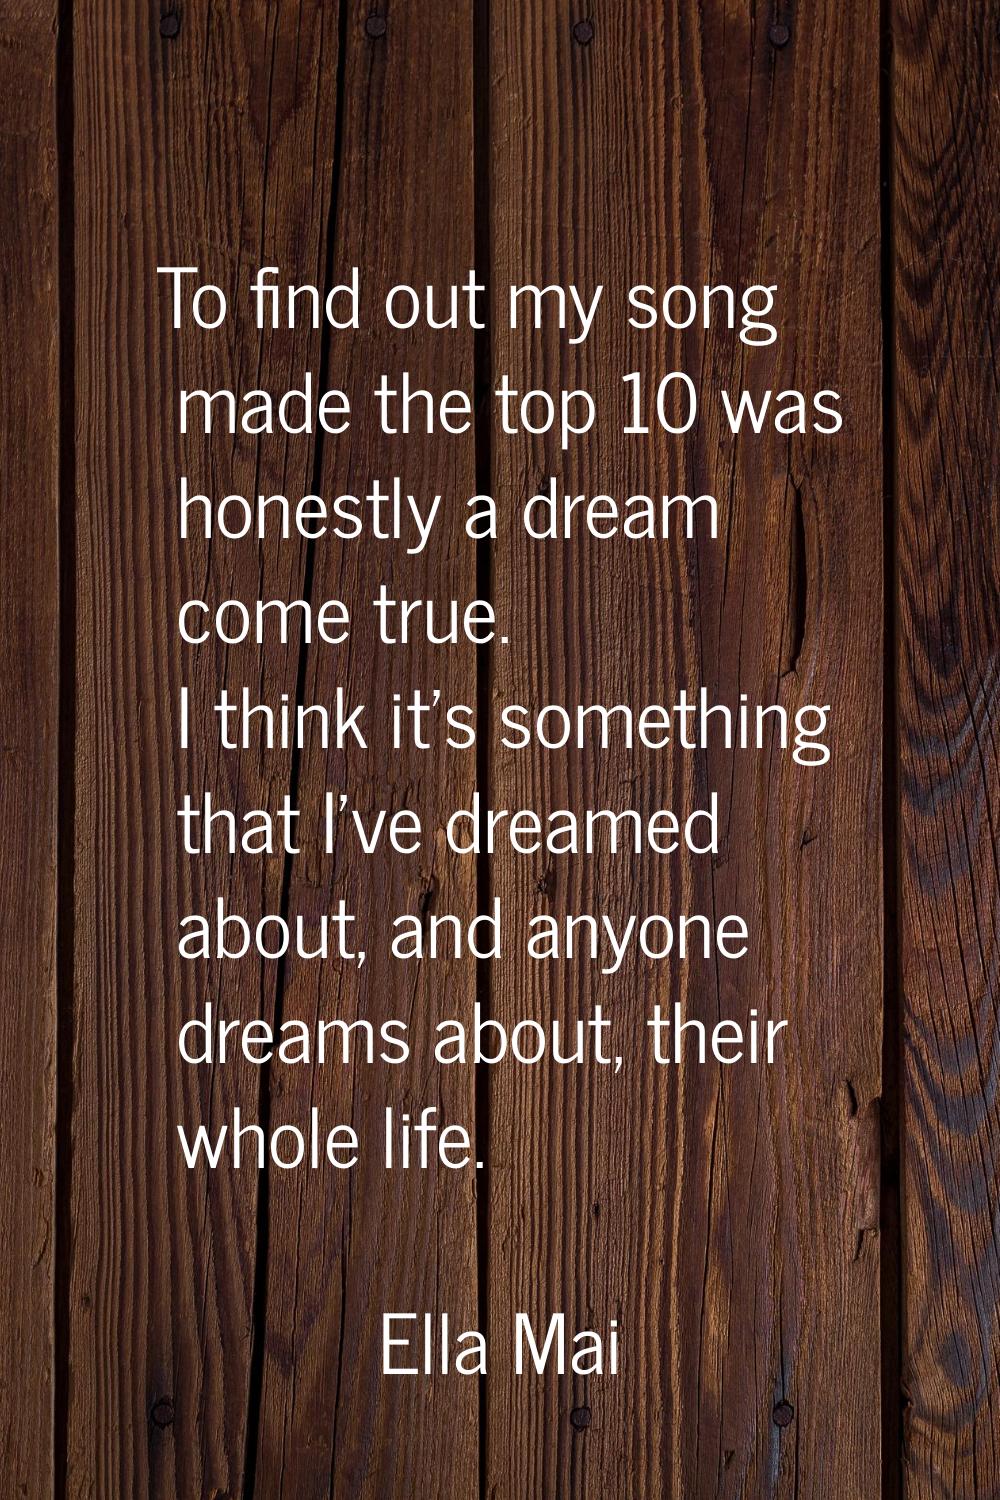 To find out my song made the top 10 was honestly a dream come true. I think it's something that I'v